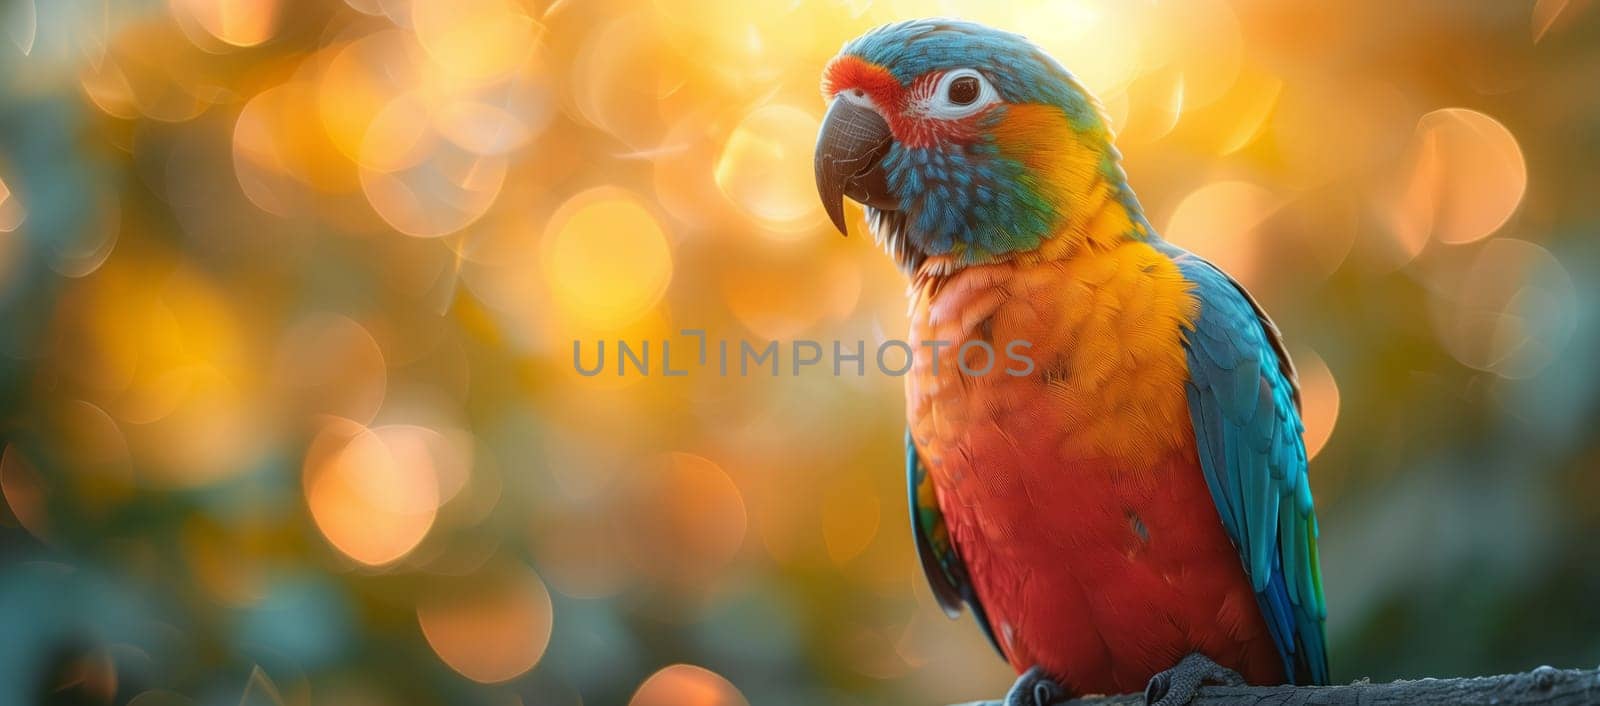 A vibrant Lovebird perched on a tree branch, showcasing its colorful feathers, beak, and wings in a closeup shot. The Macaw stands out among the greenery with its striking plumage